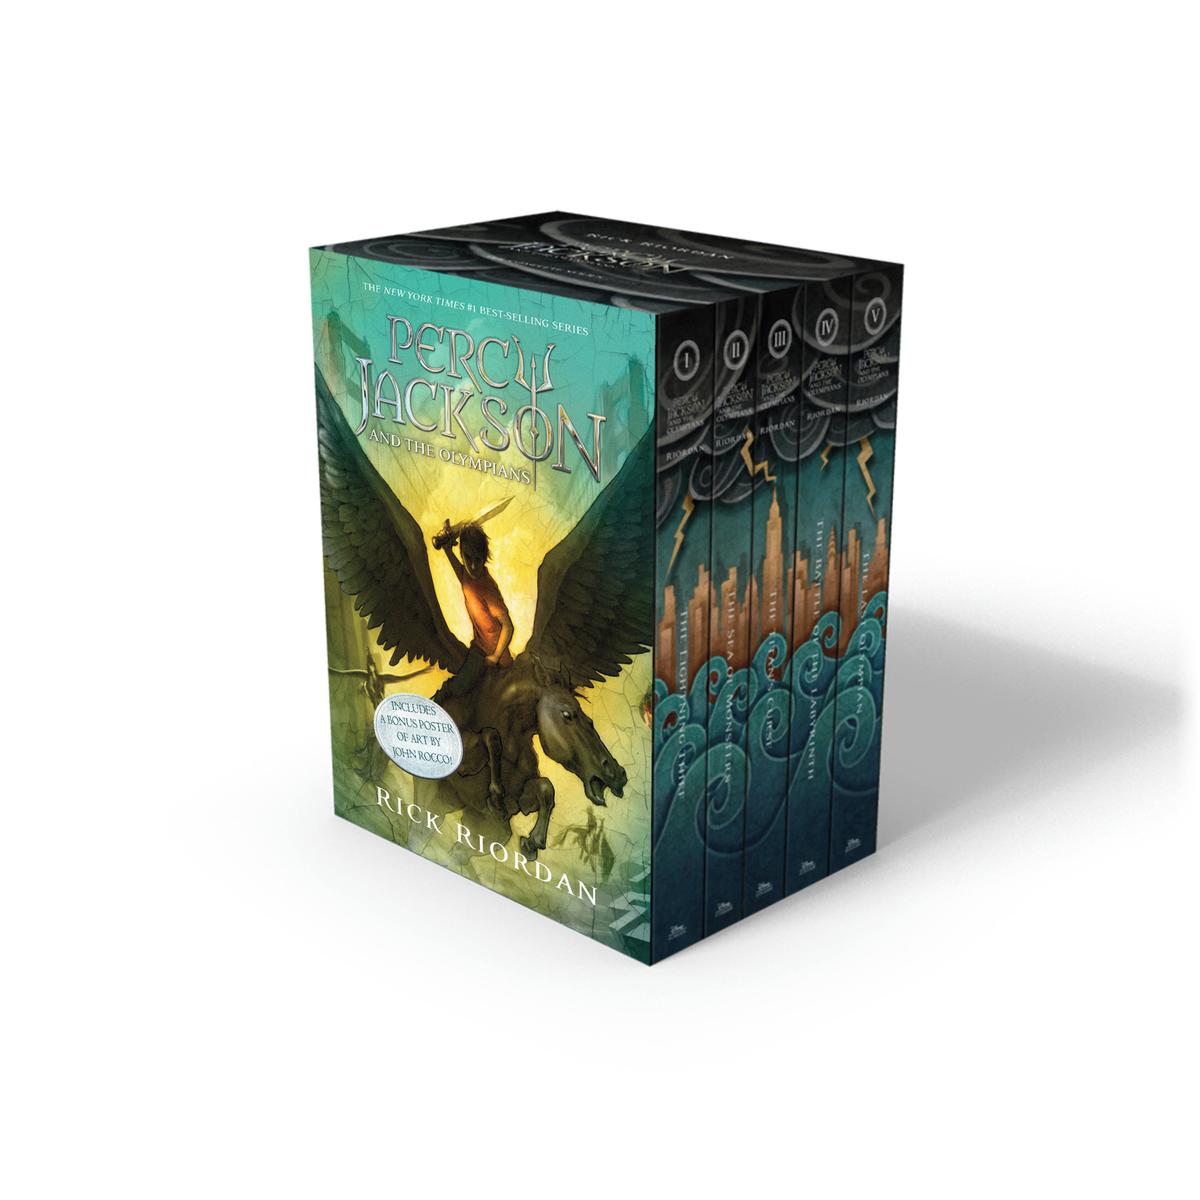 Percy Jackson and the Olympians 5 Book Paperback Boxed Set (w/poster) - 